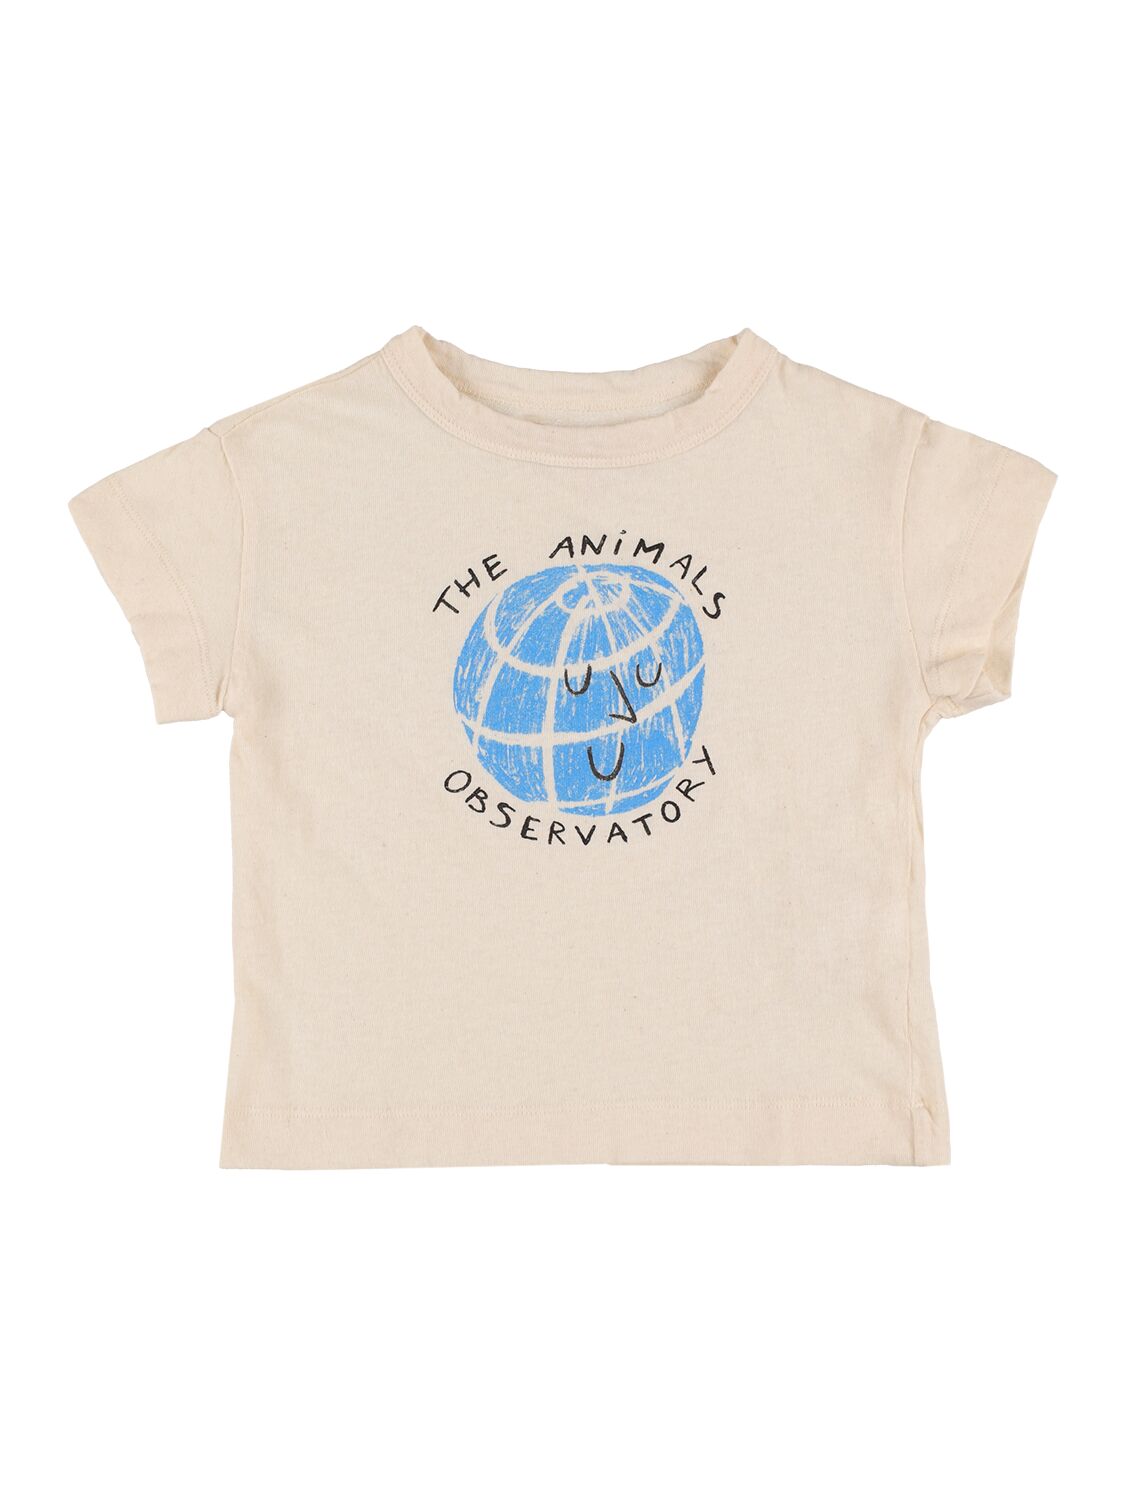 The Animals Observatory Kids' Printed Organic Cotton T-shirt In Off-white